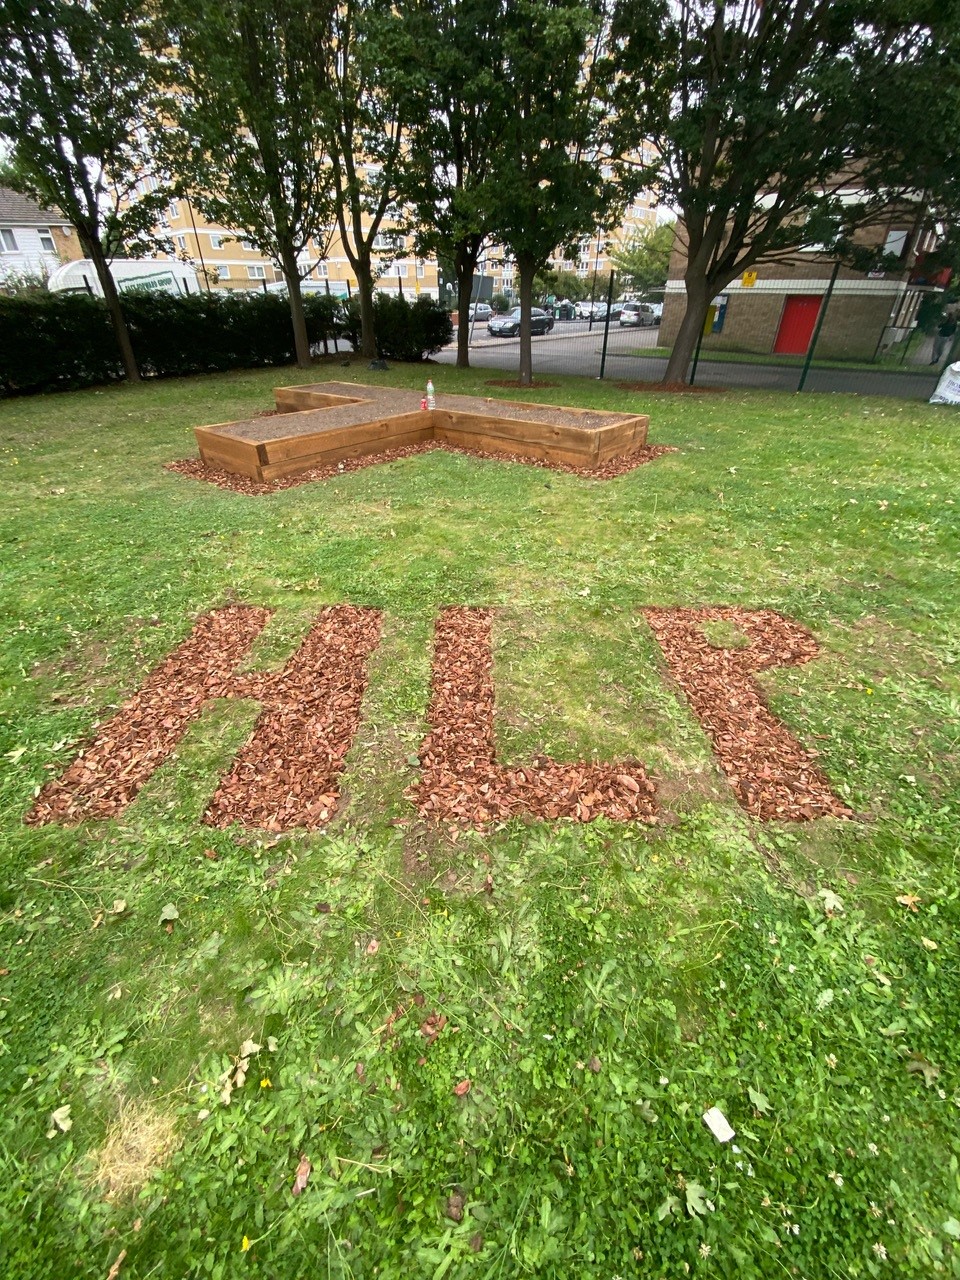 Letters HLP as lawn art for Haringey Learning Partnership